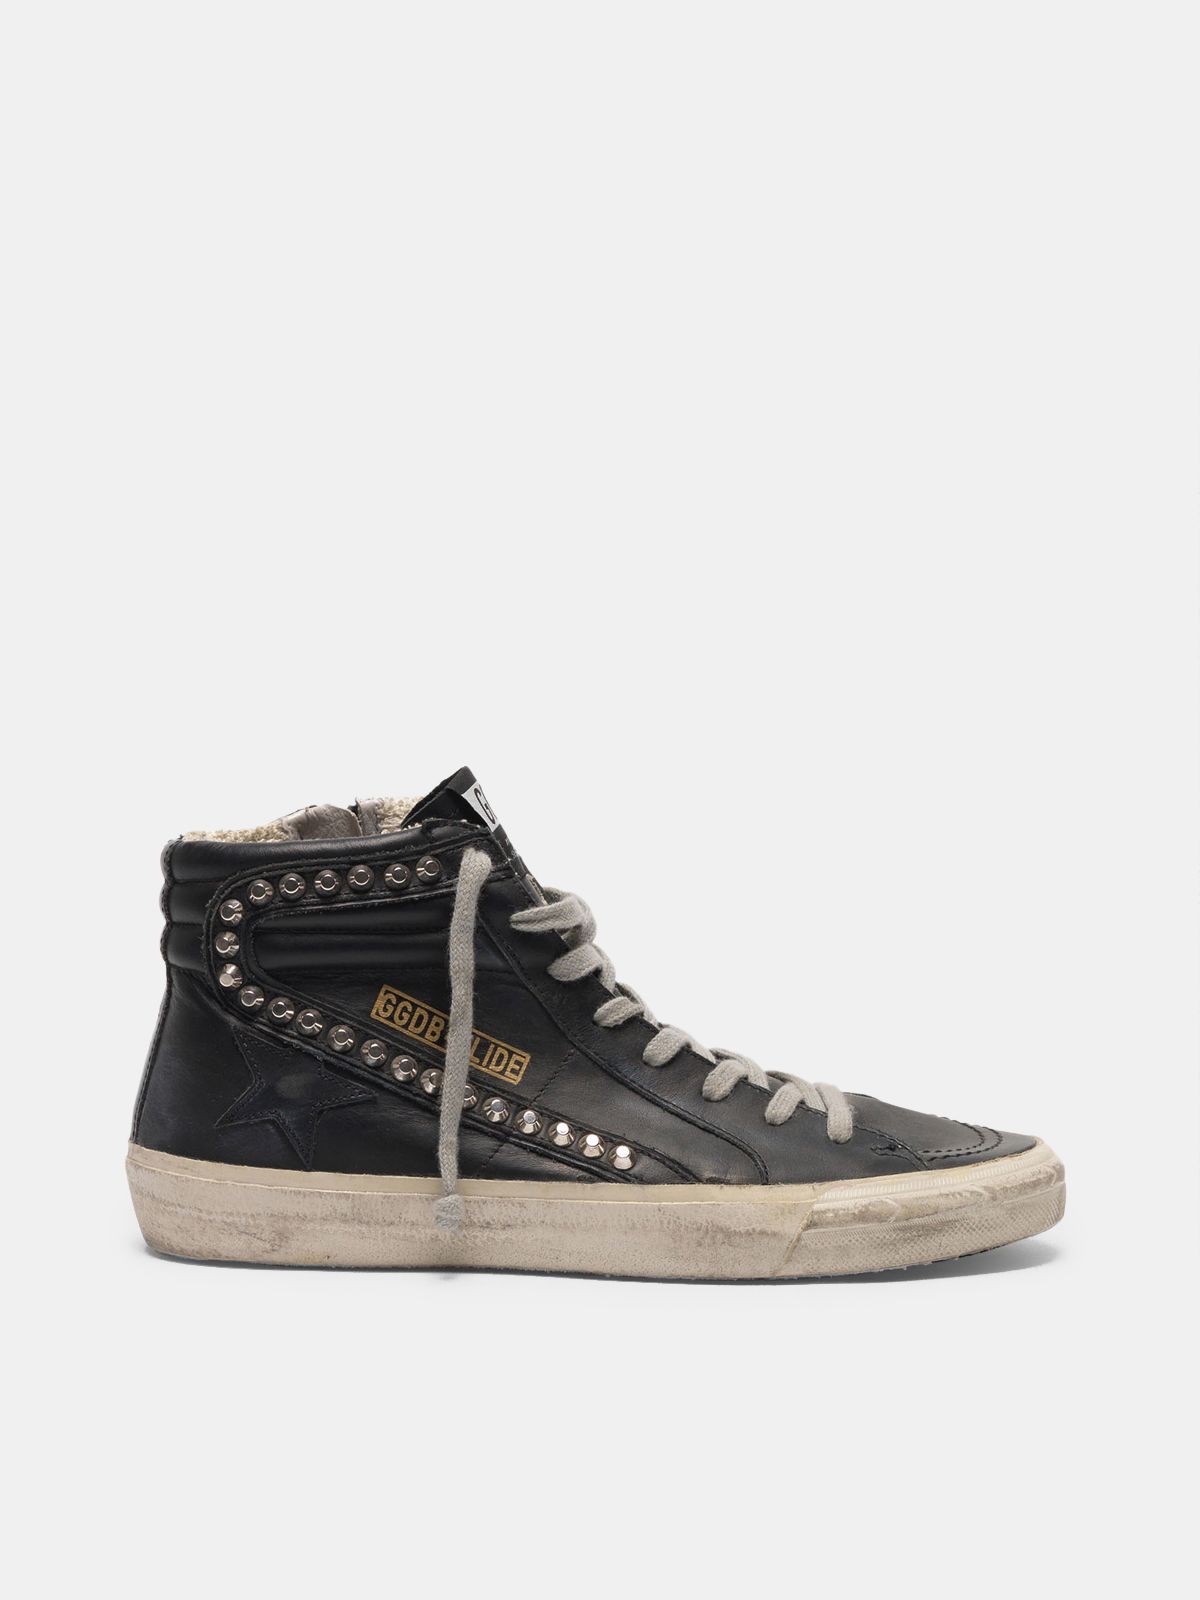 Slide sneakers in metal studded leather